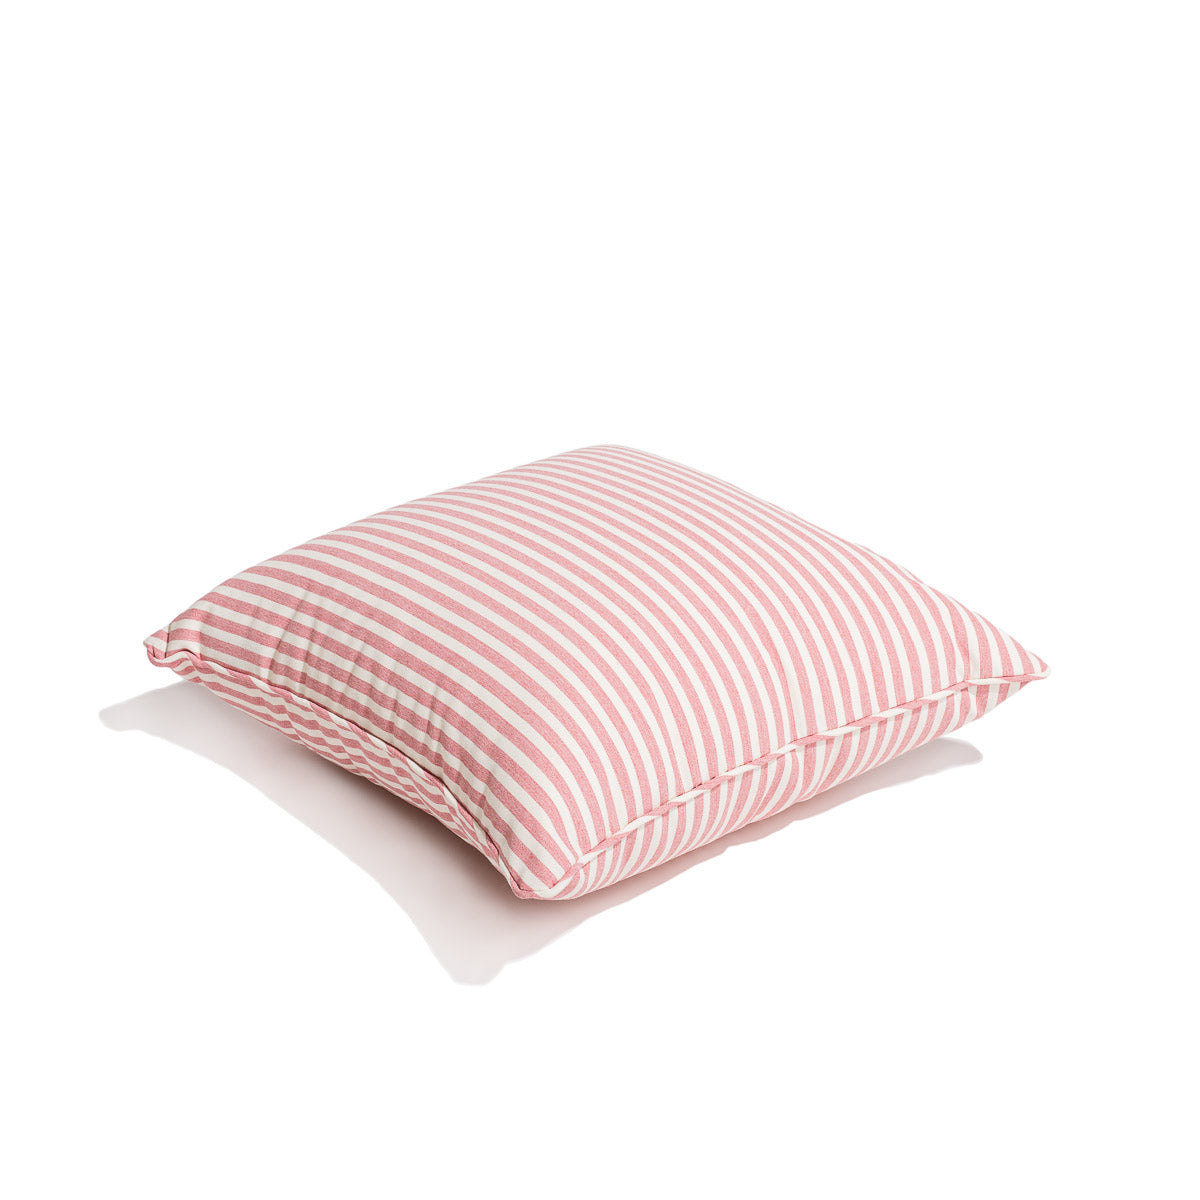 The Small Square Throw Pillow - Lauren's Pink Stripe